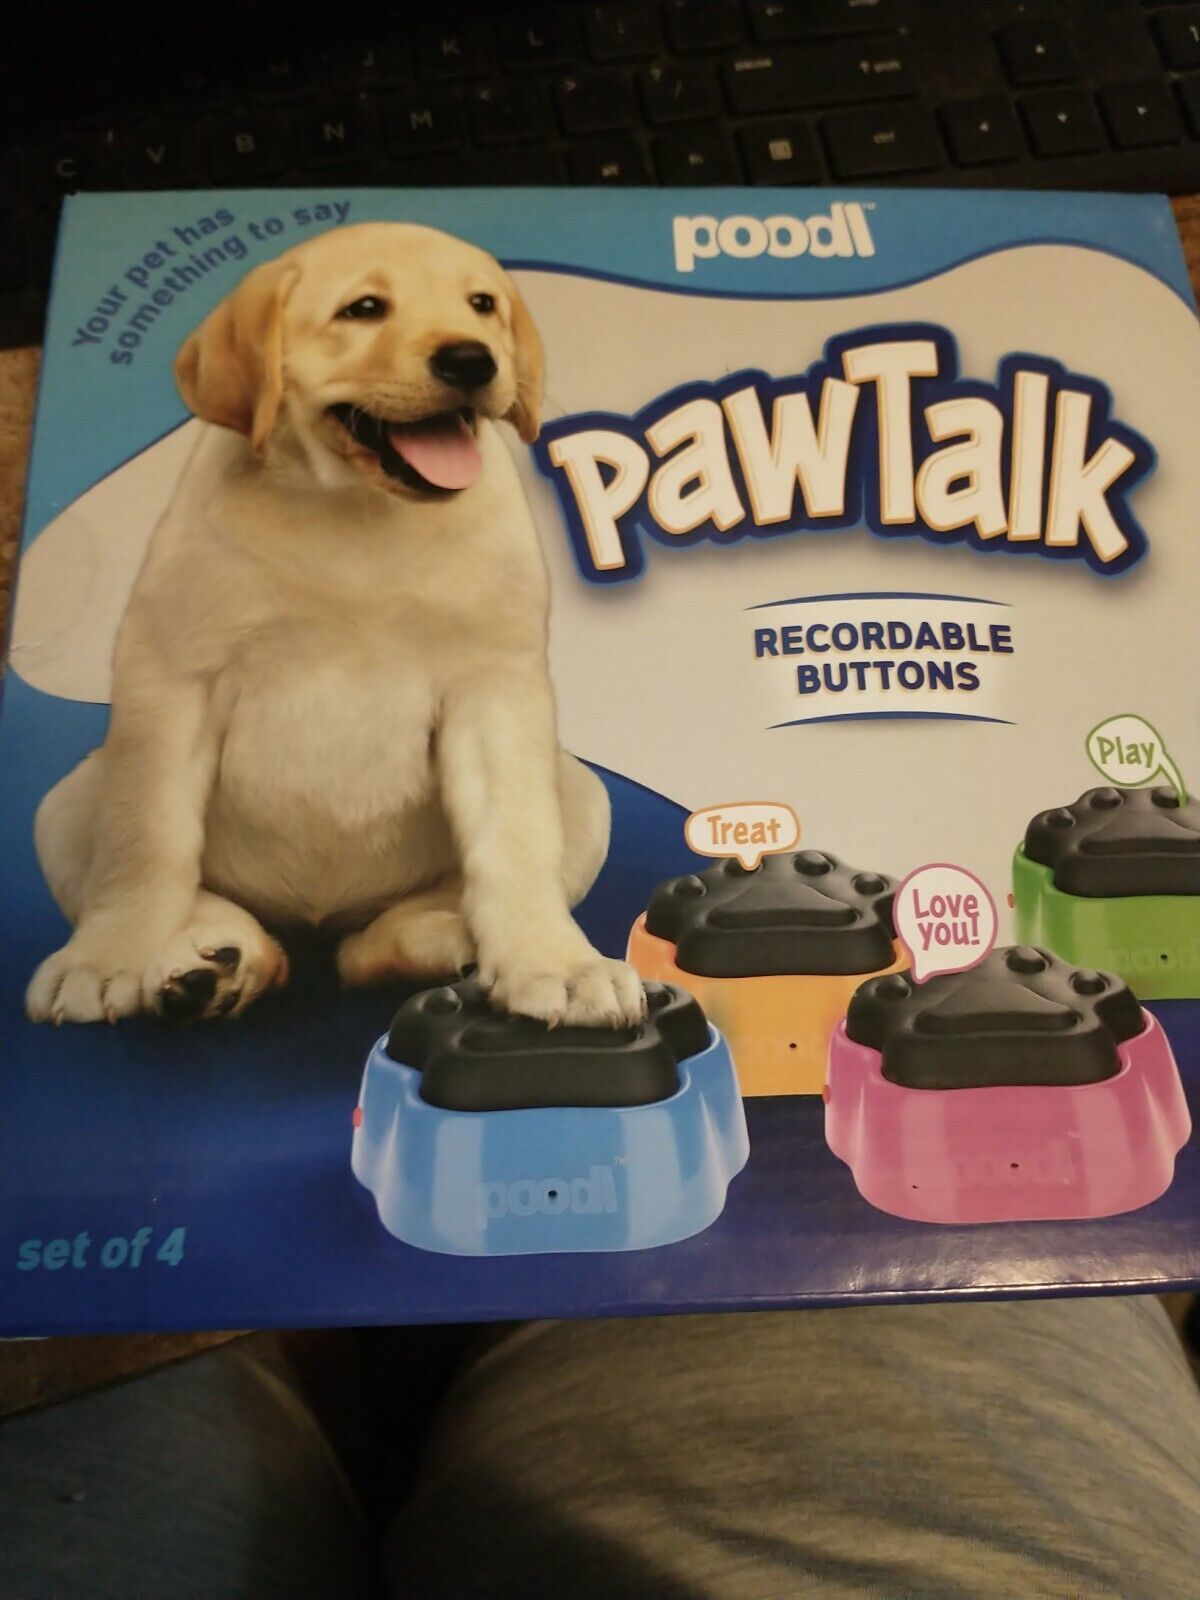 Primary image for Poodl Paw Talk Set of 4 Recordable Buttons  unleash your dog's inner voice NIB